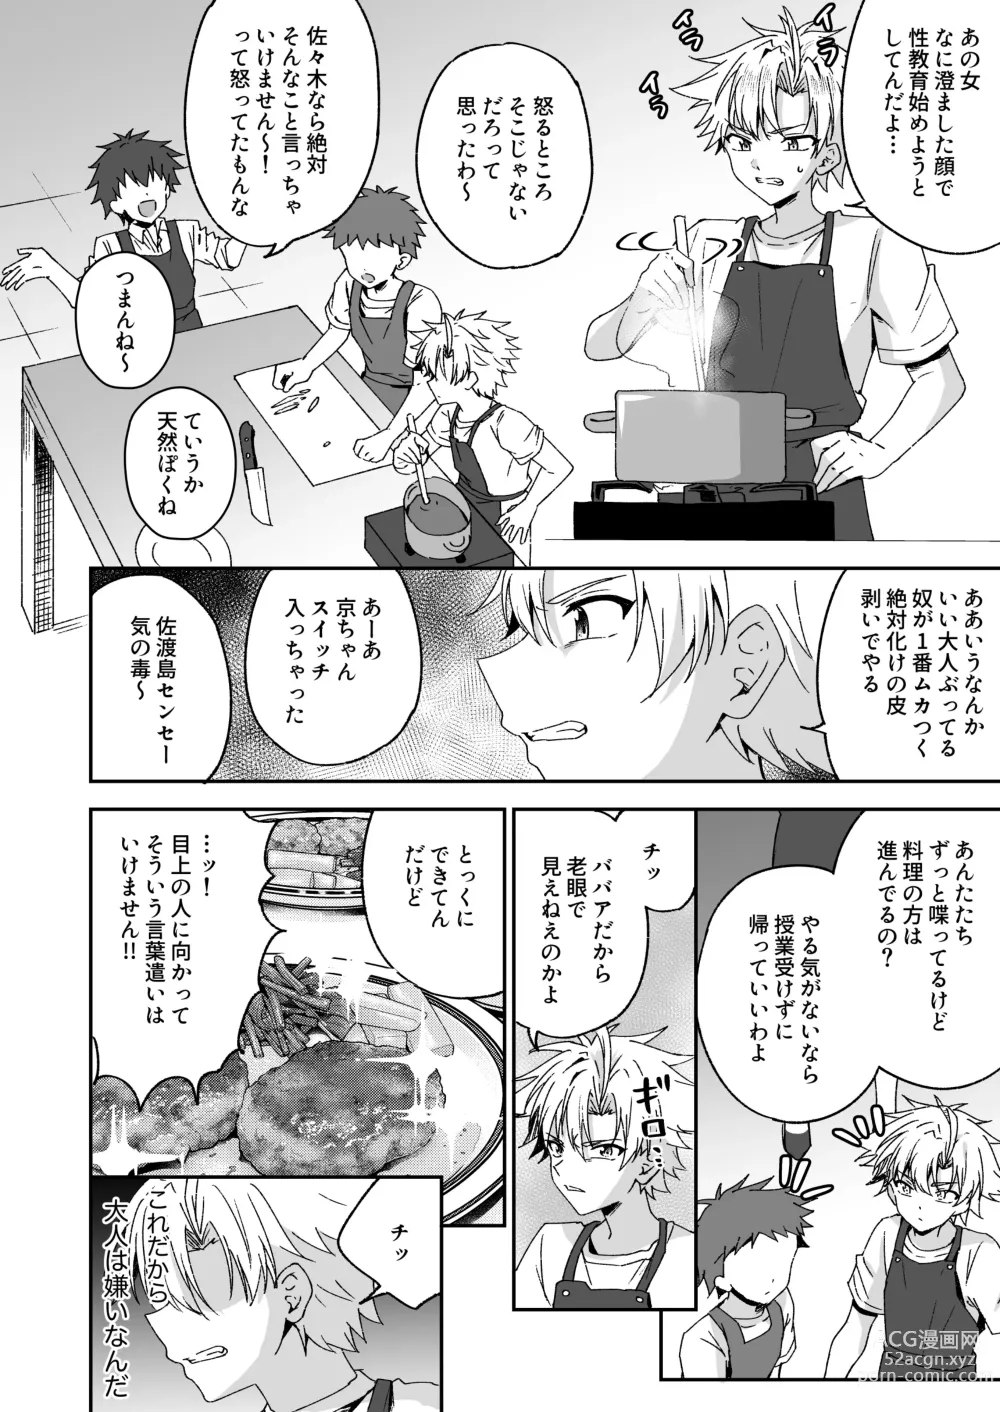 Page 5 of doujinshi A story about a delinquent boy who gets chastity belt ejaculation control reverse anal sex by a female teacher who is a nymphomaniac